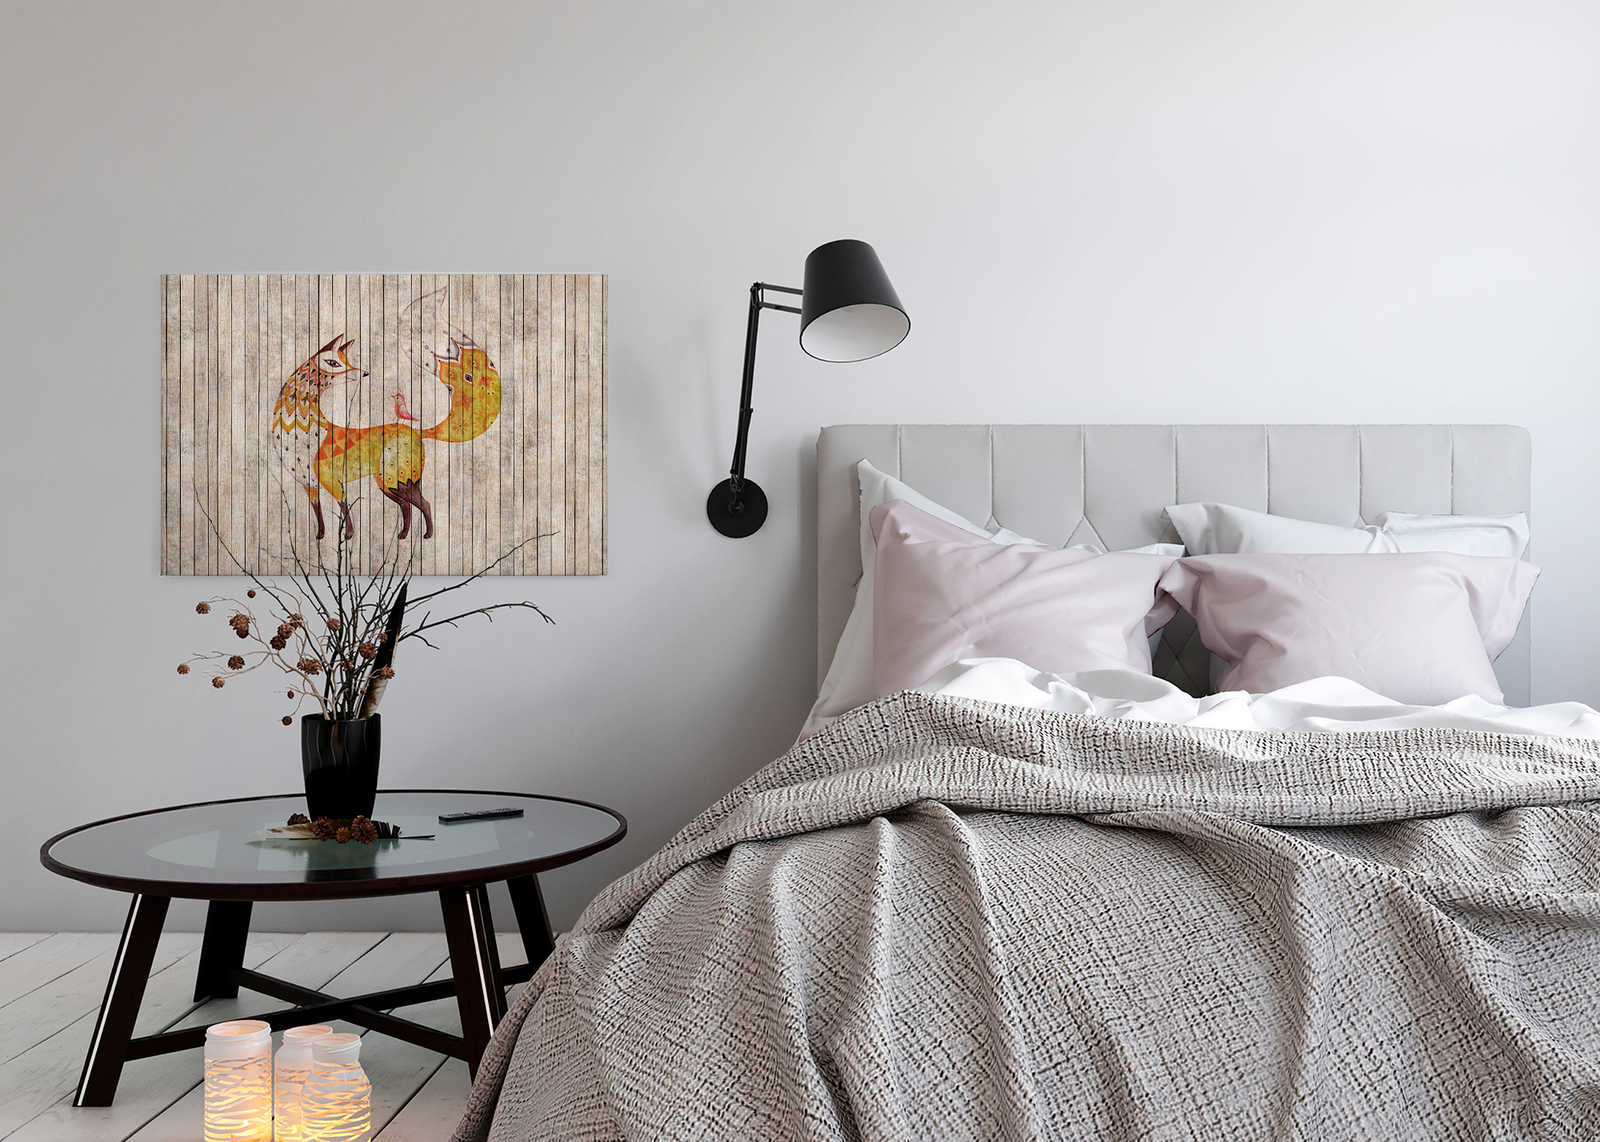             Fairy tale 2 - Fox and bird on wood look canvas picture - 0.90 m x 0.60 m
        